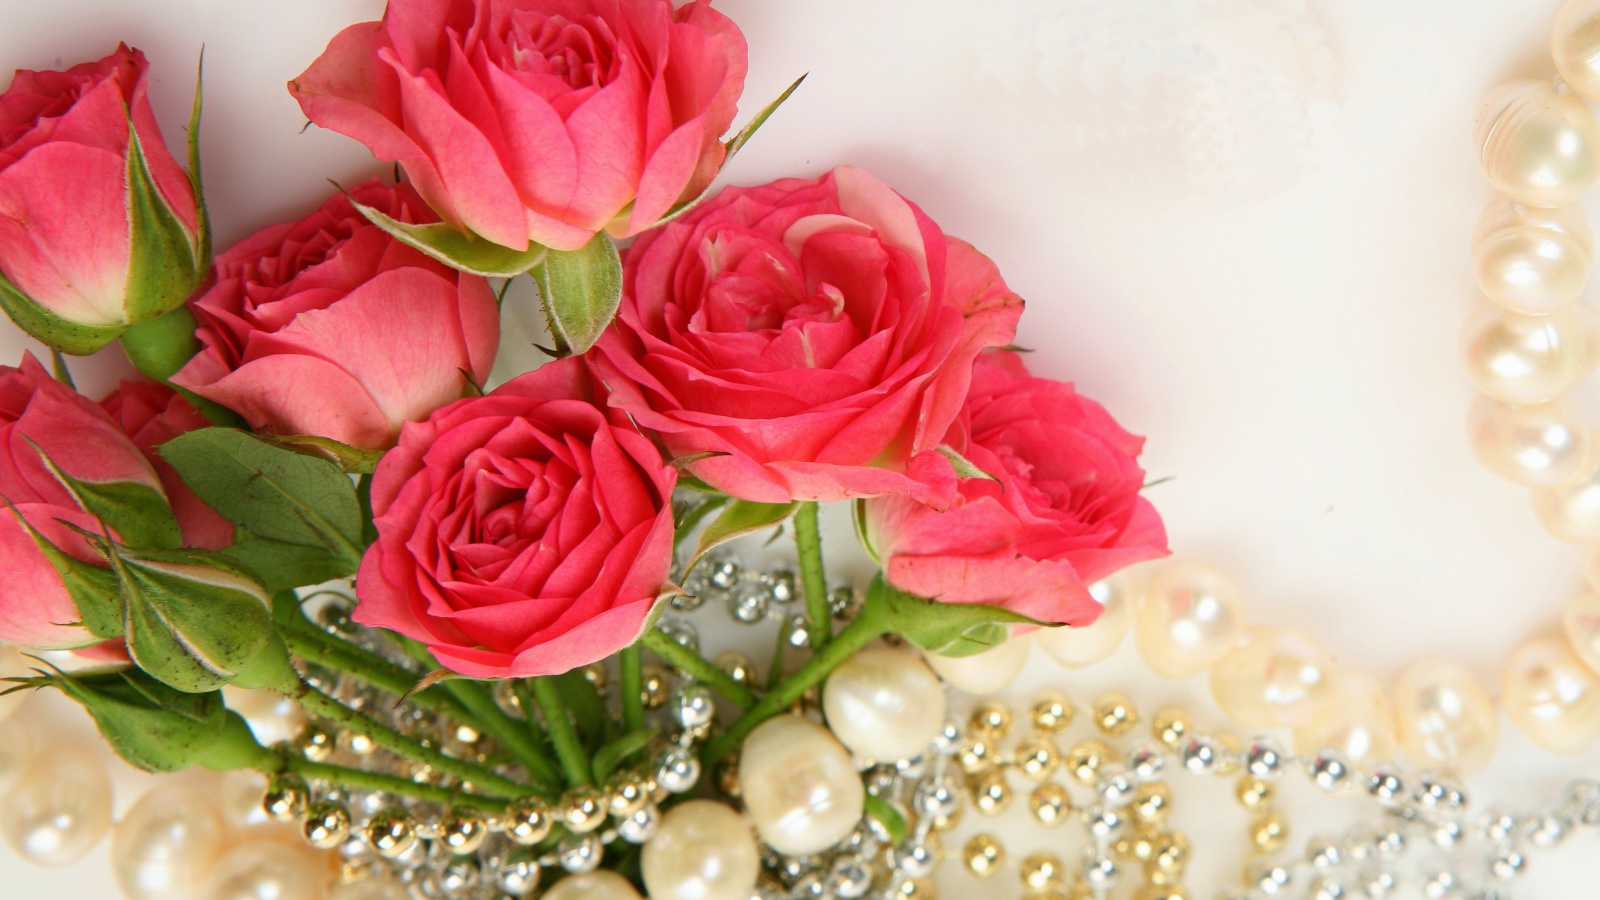 Necklace and Roses Bouquet screenshot #1 1600x900